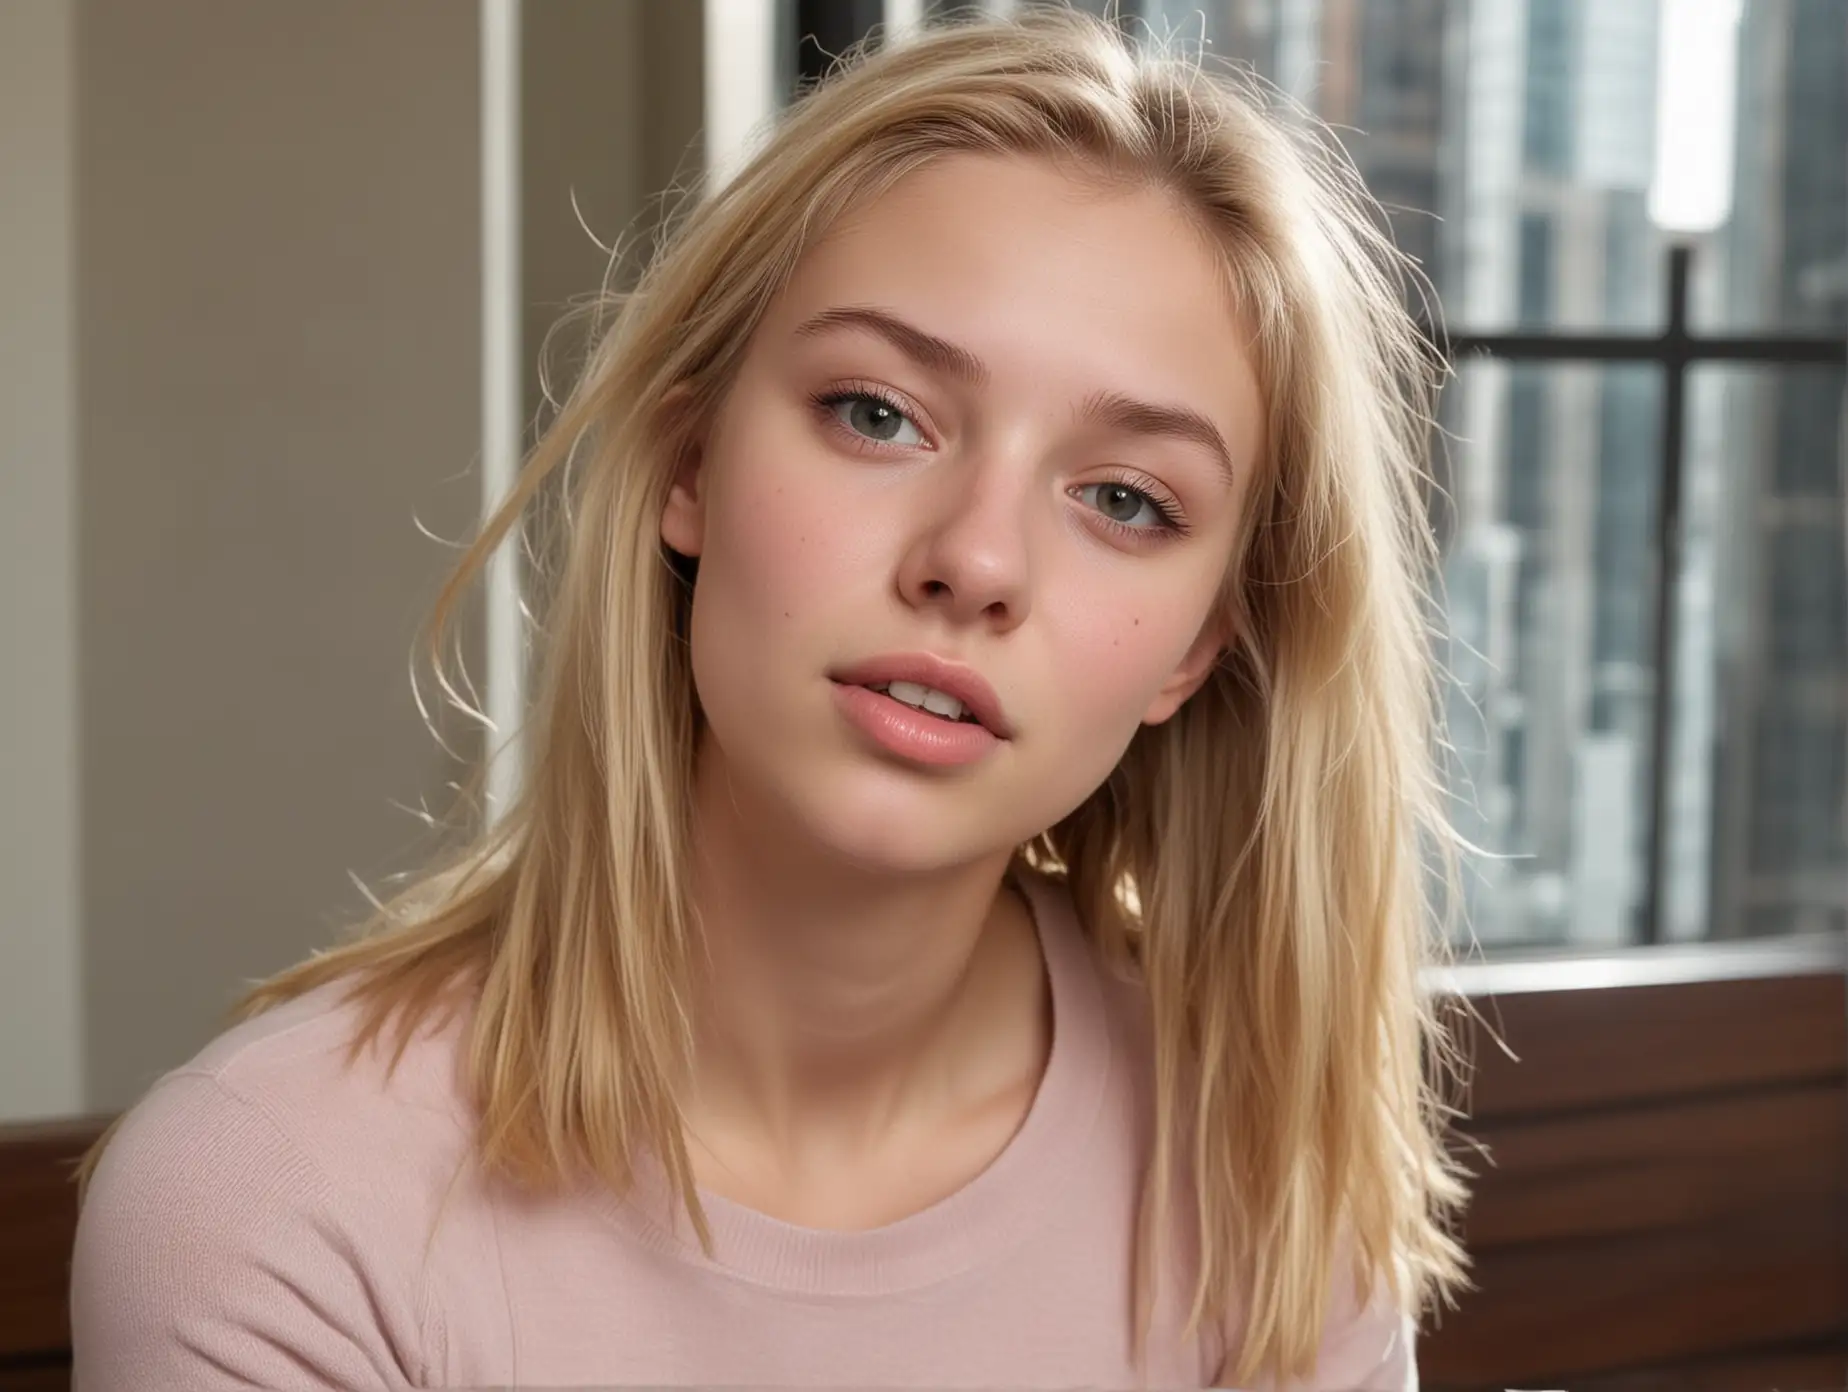 Face of a petite slender sweet blond 19 year old model with a tiny perky upturned nose and a tiny mouth blushing and looking up in shocked amazement at the camera from a bench in the entry lobby of a high-rise office building.